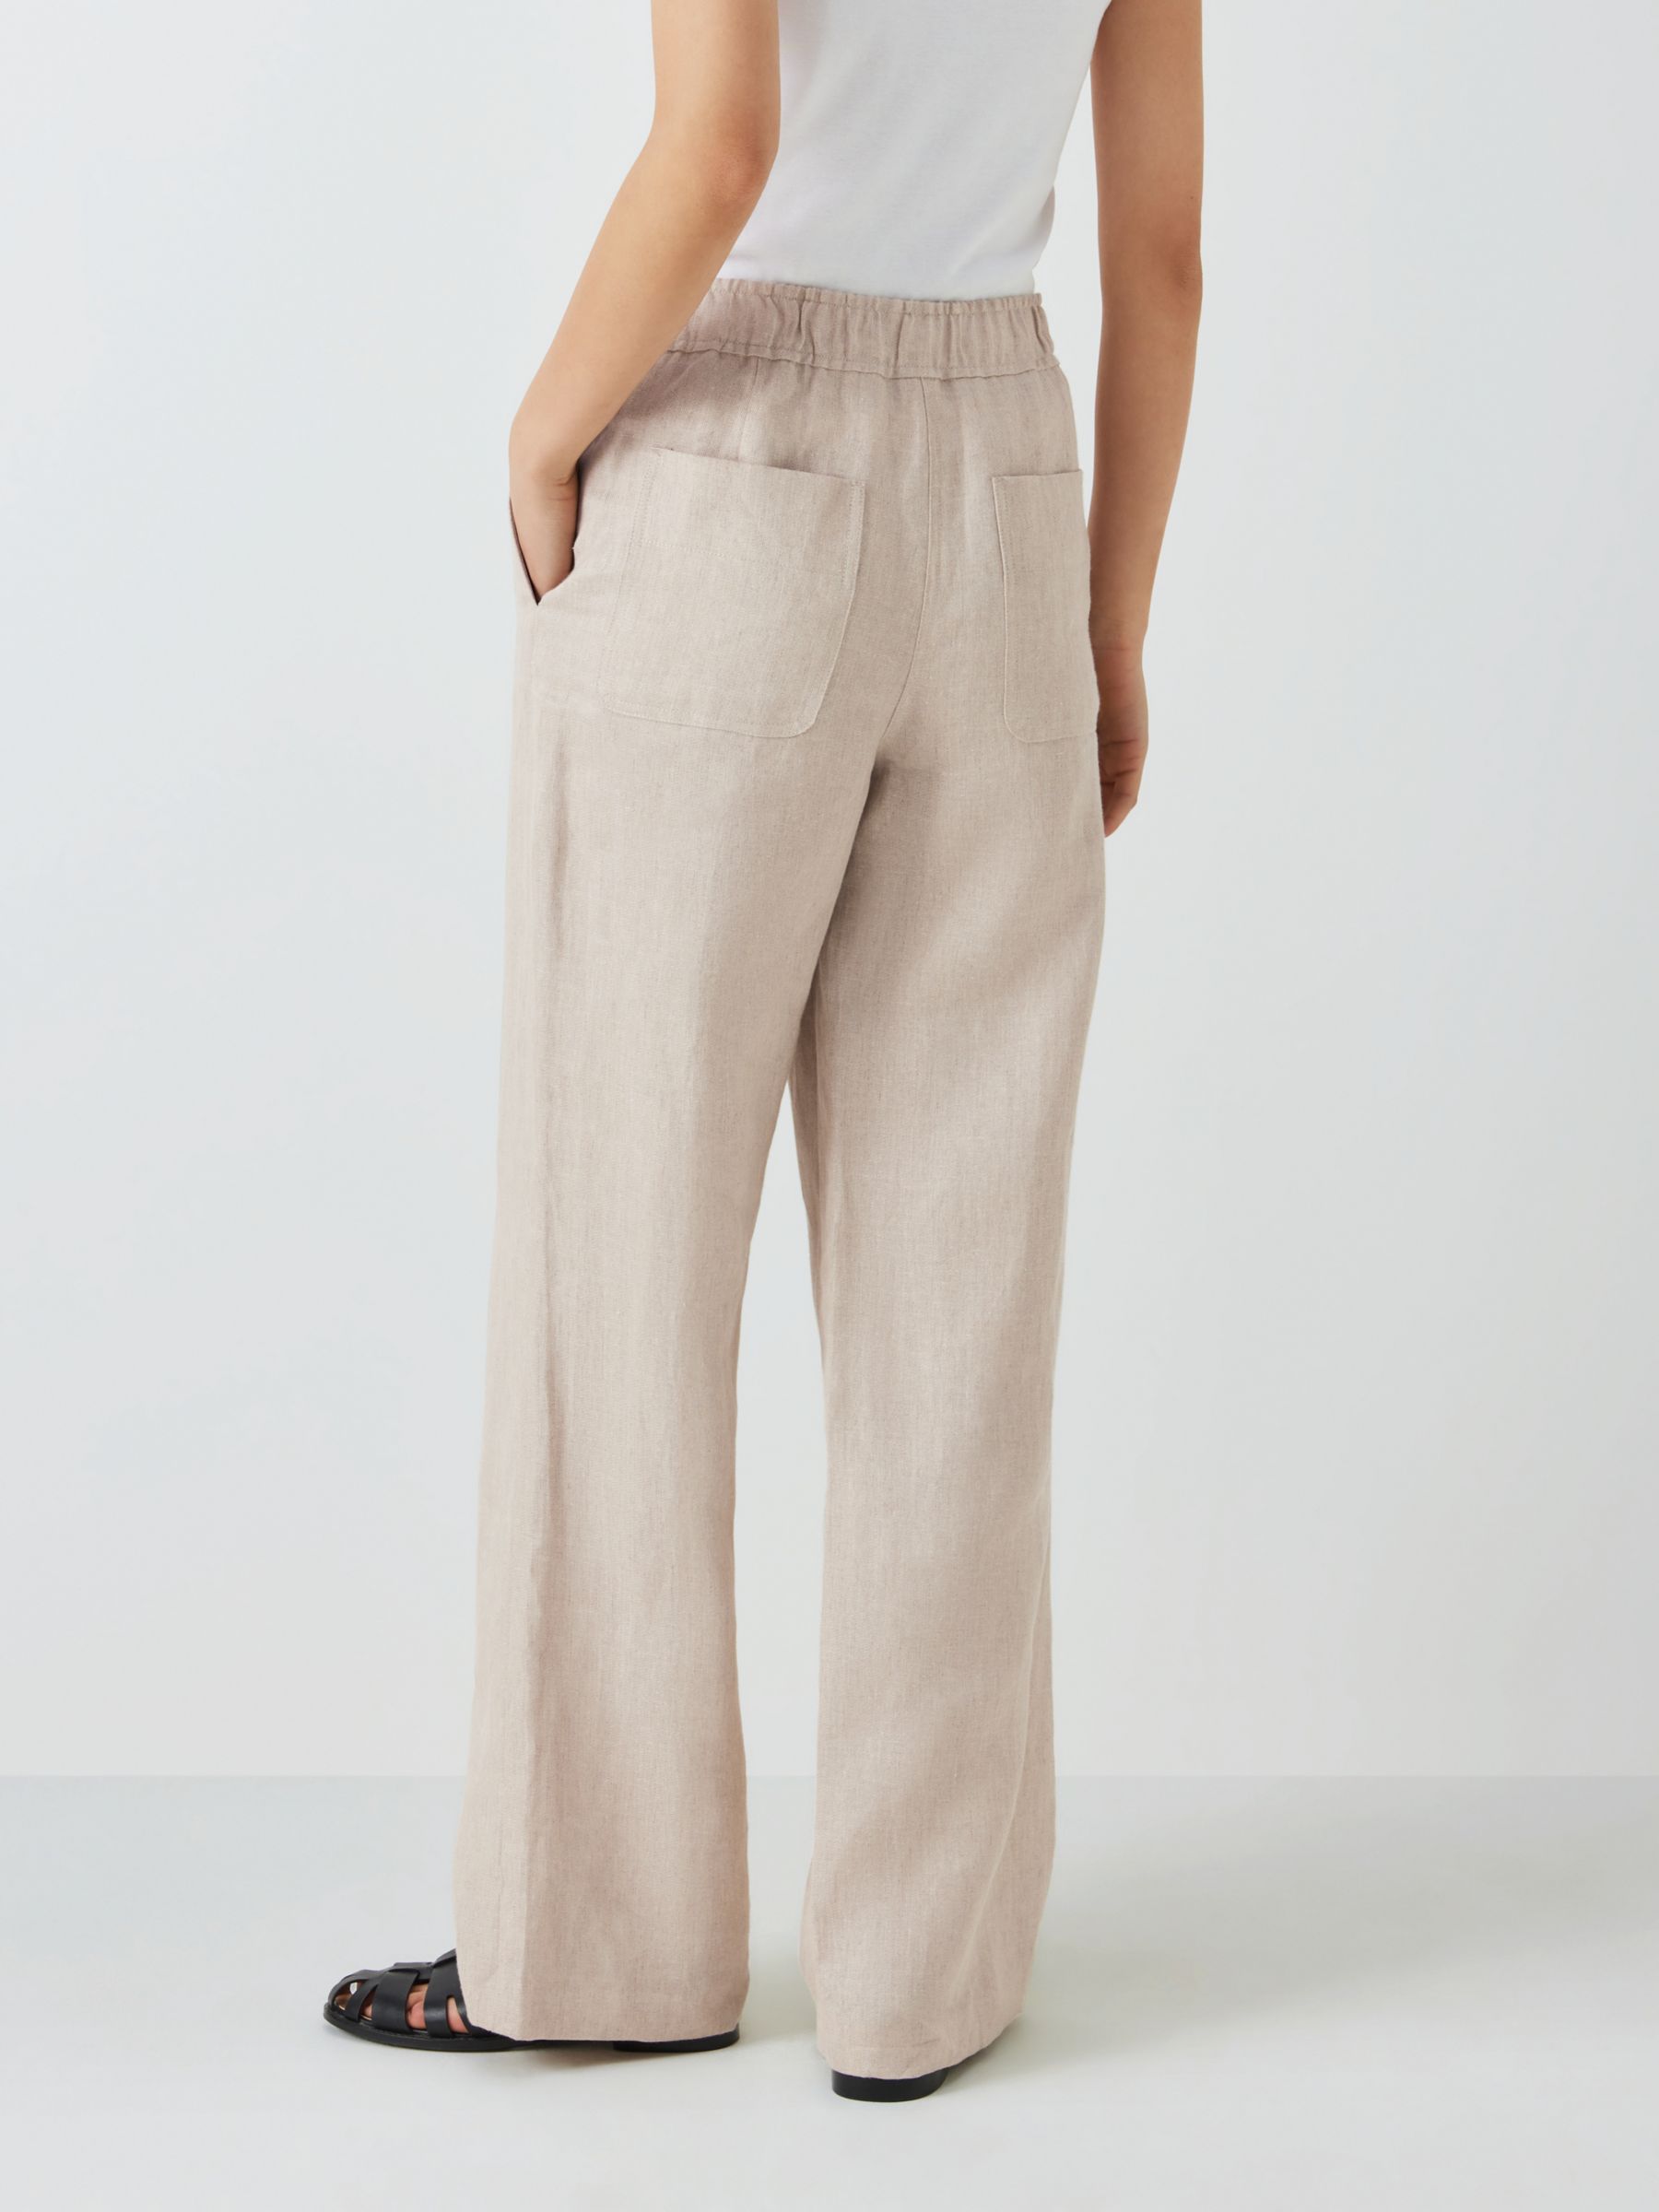 John Lewis Straight Fit Linen Trousers, Natural Twill, 8